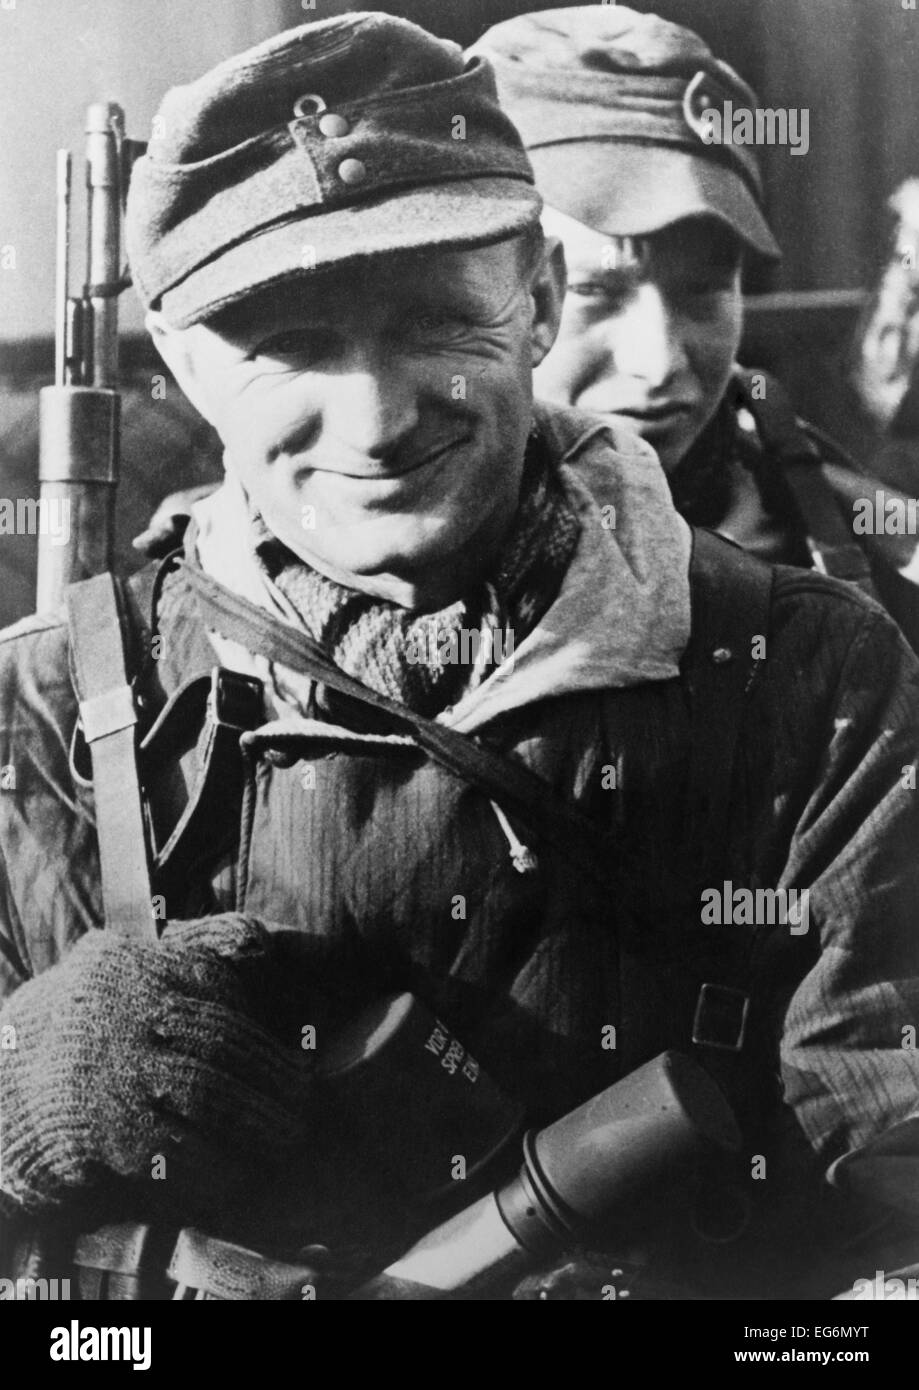 Two German soldiers, one middle aged, on the Oder Front in early 1945. The Soviet (Russian) armies were near but paused, after Stock Photo